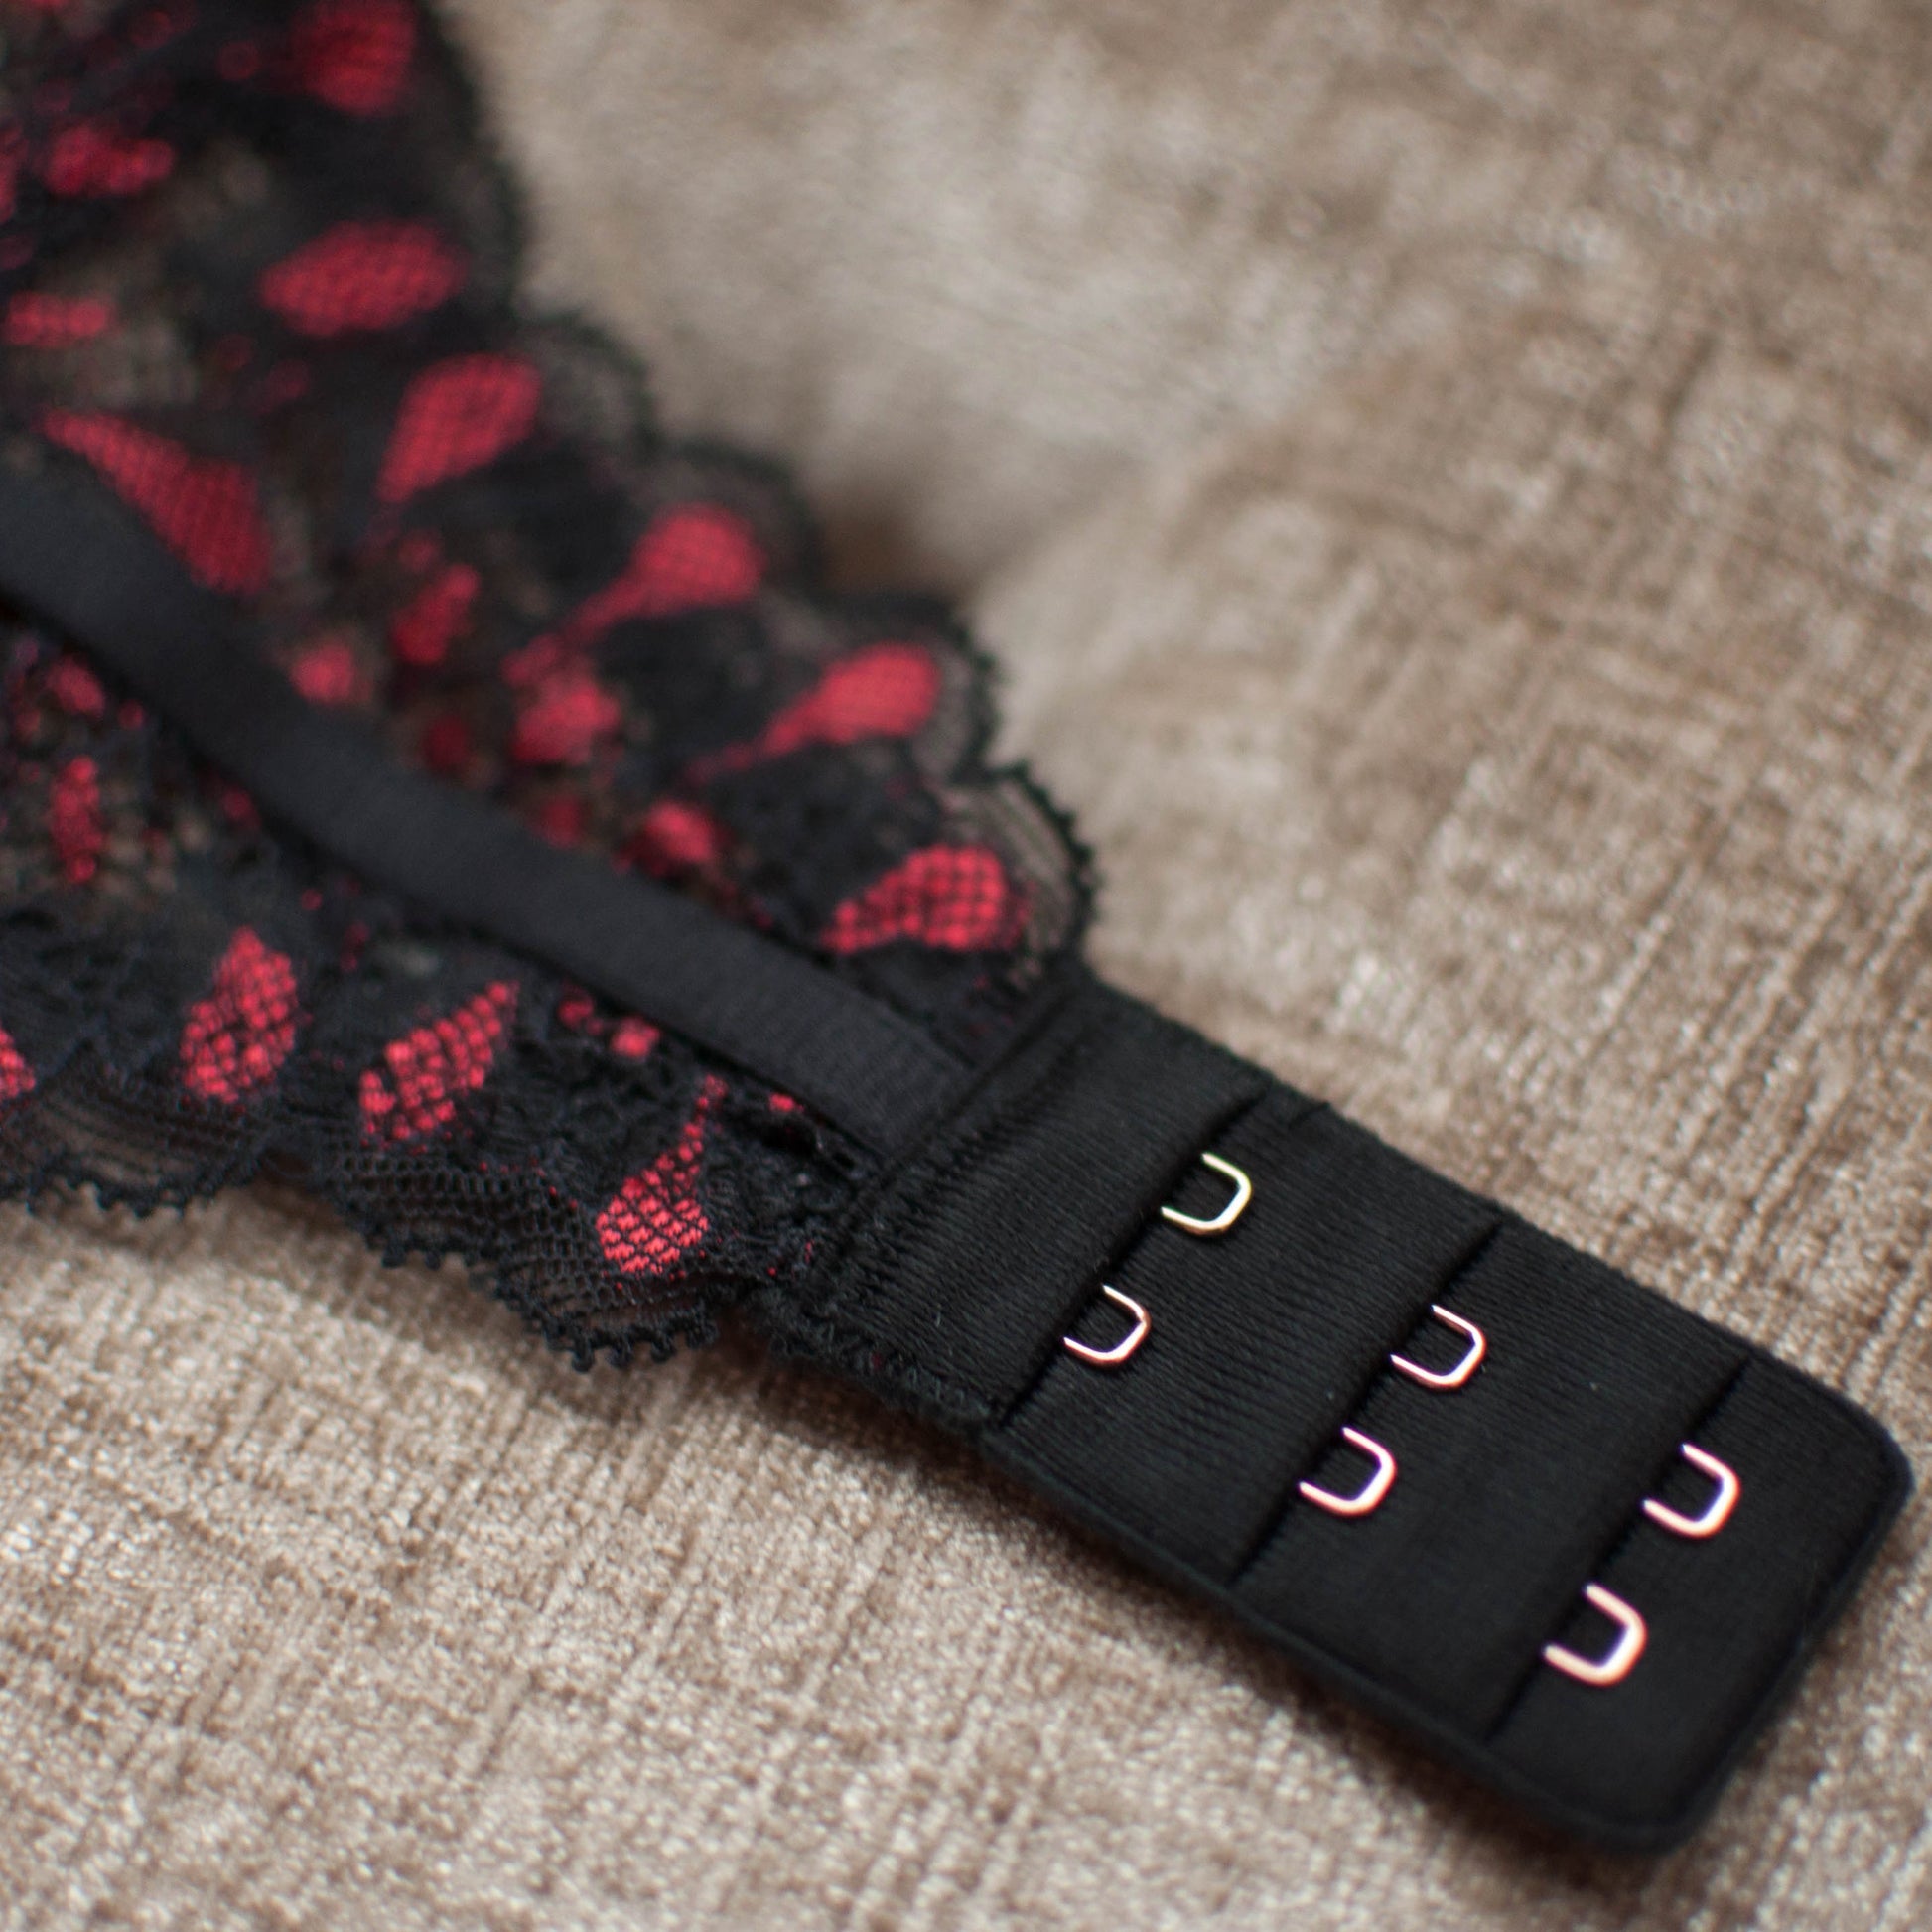 Black & red lace Lucy May Maybella Suspender hook and eye